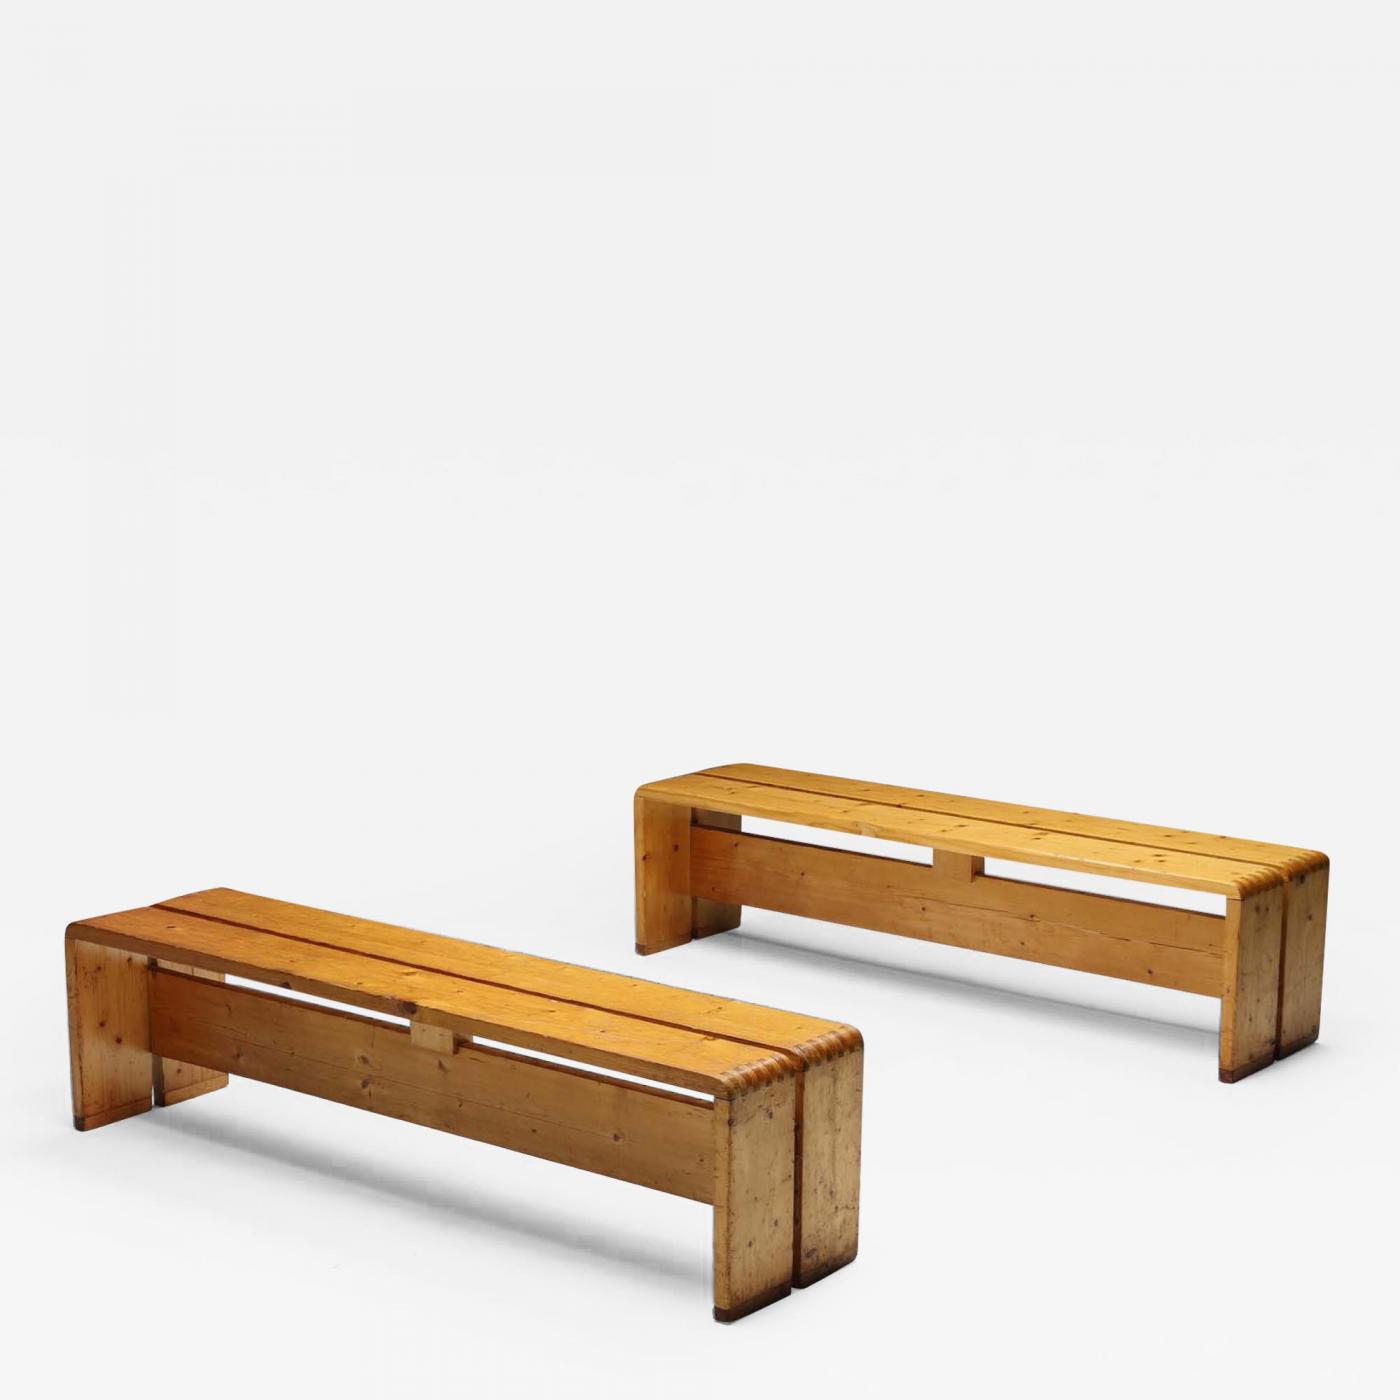 Sold at Auction: Charlotte Perriand, CHARLOTTE PERRIAND Les Arcs long pine  bench.